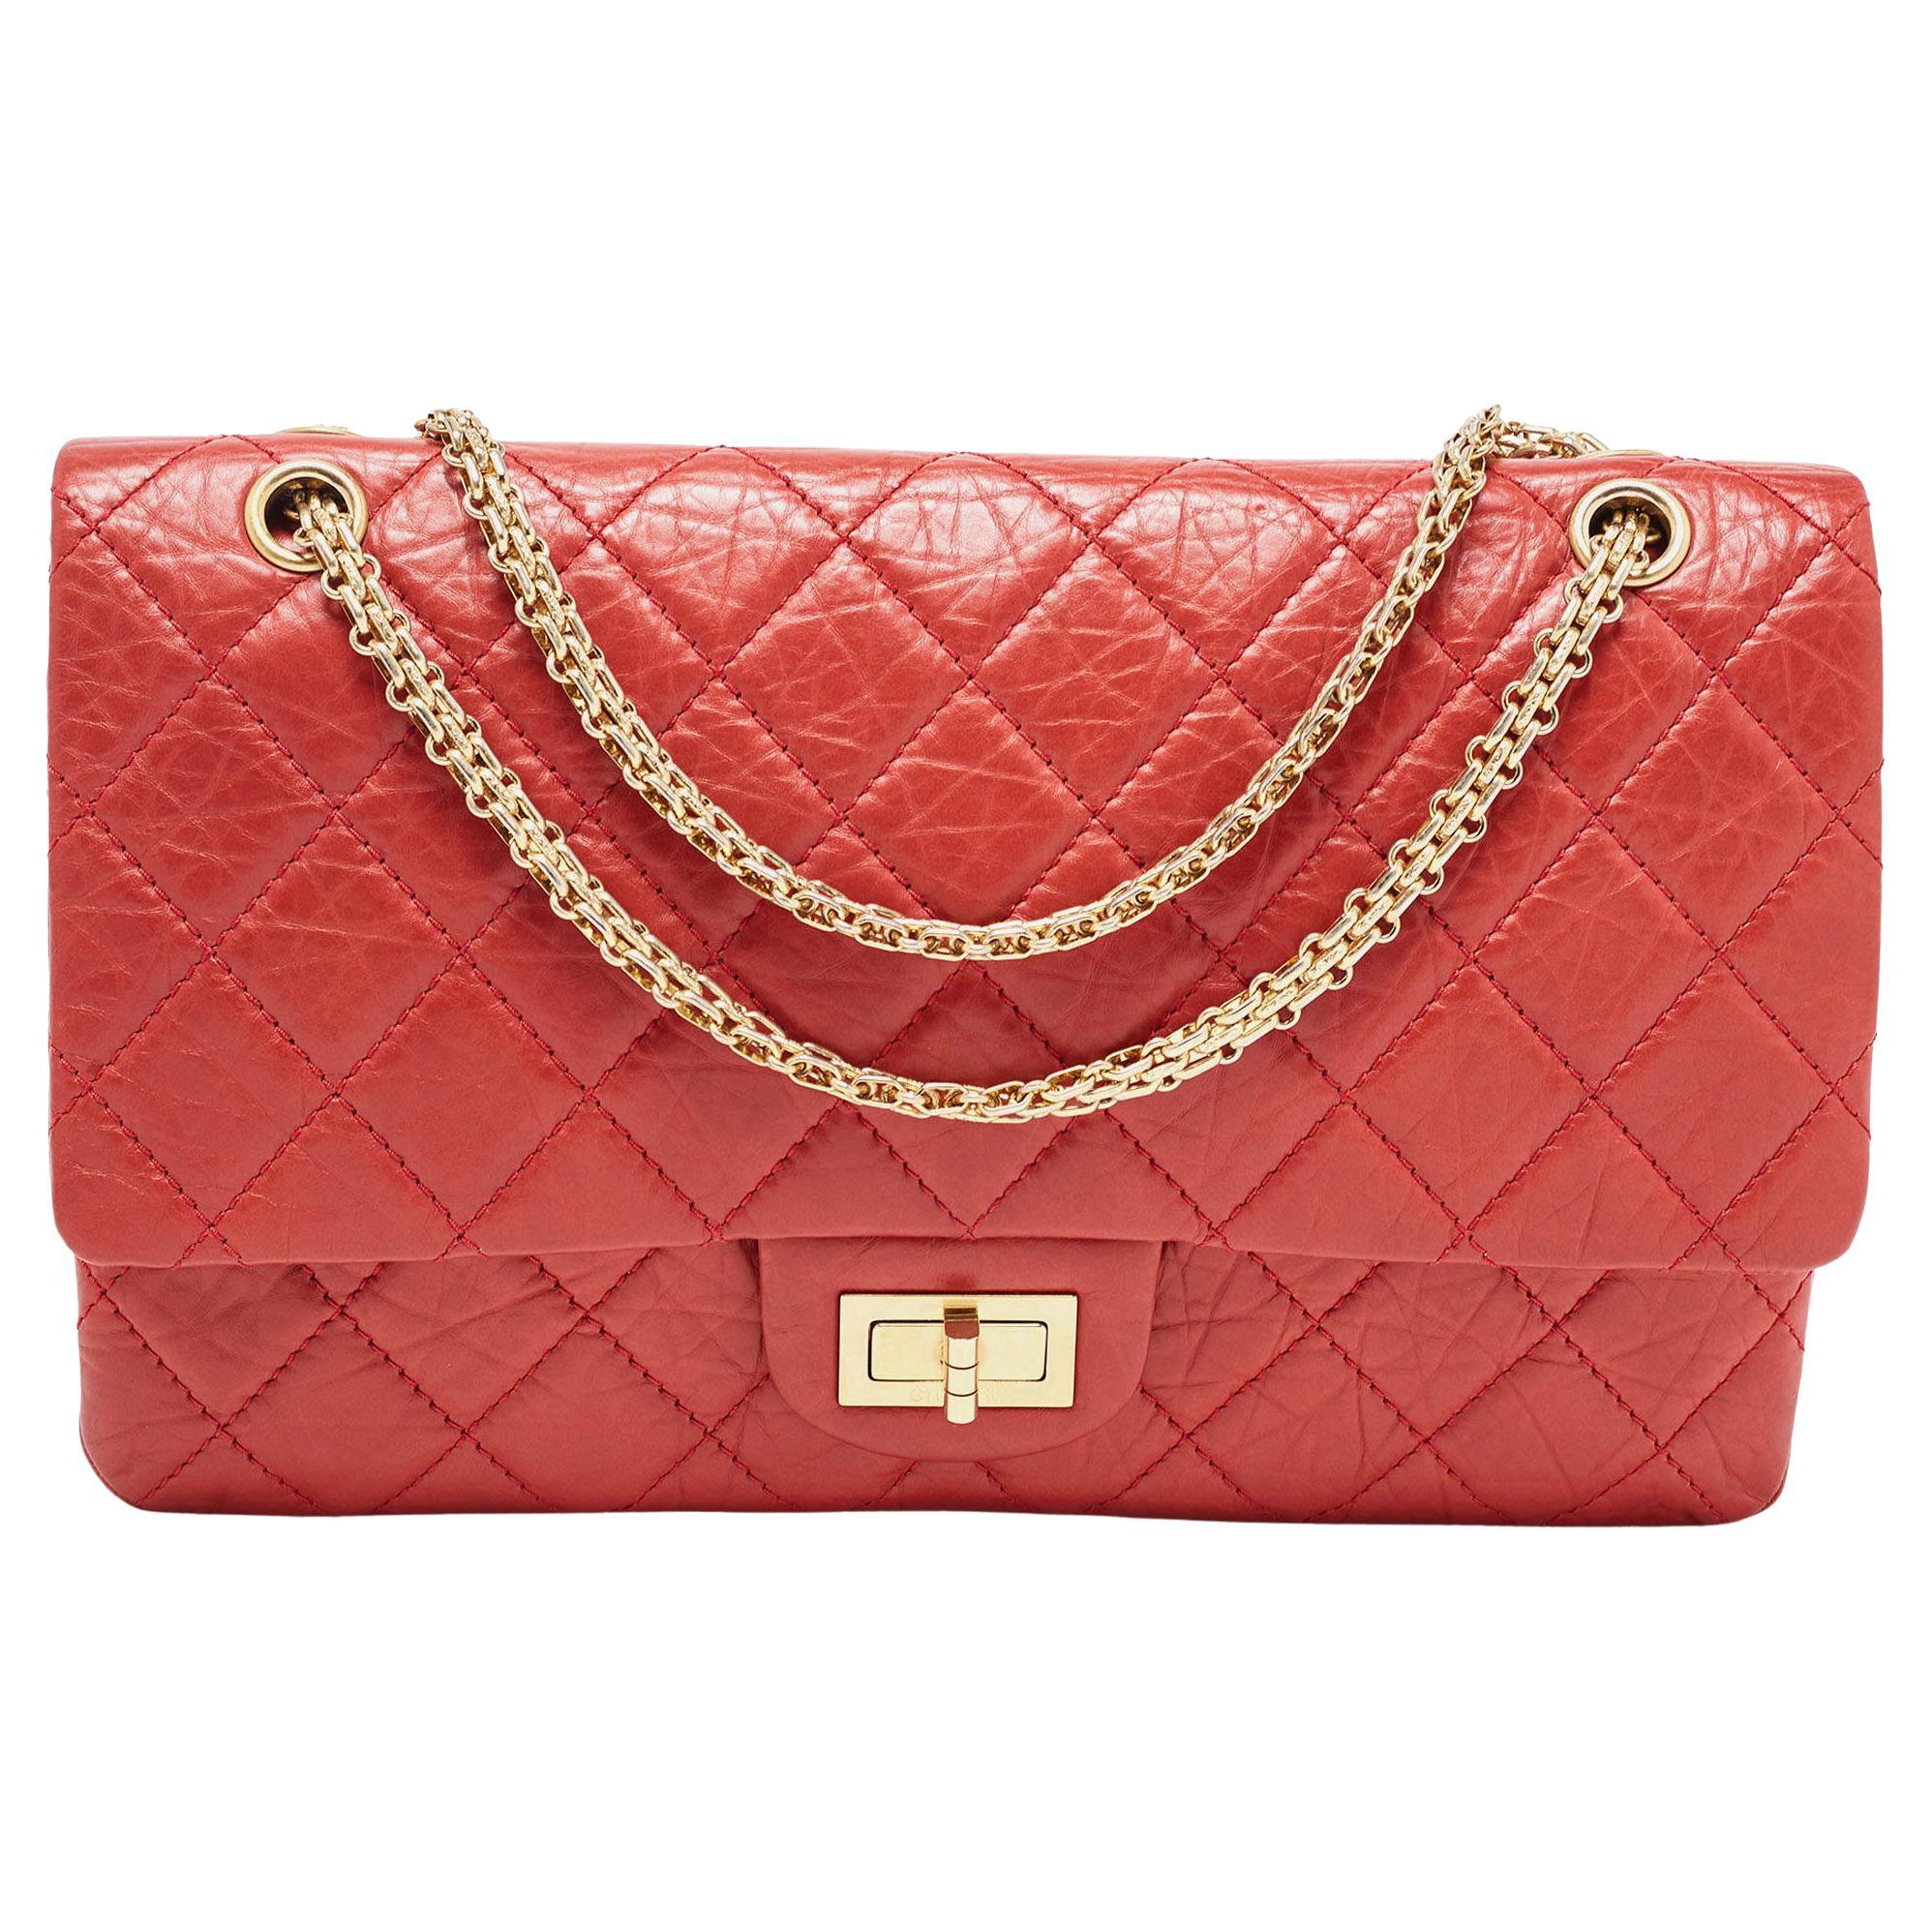 Chanel Red Quilted Aged Leather Reissue 2.55 Classic 227 Flap Bag For Sale